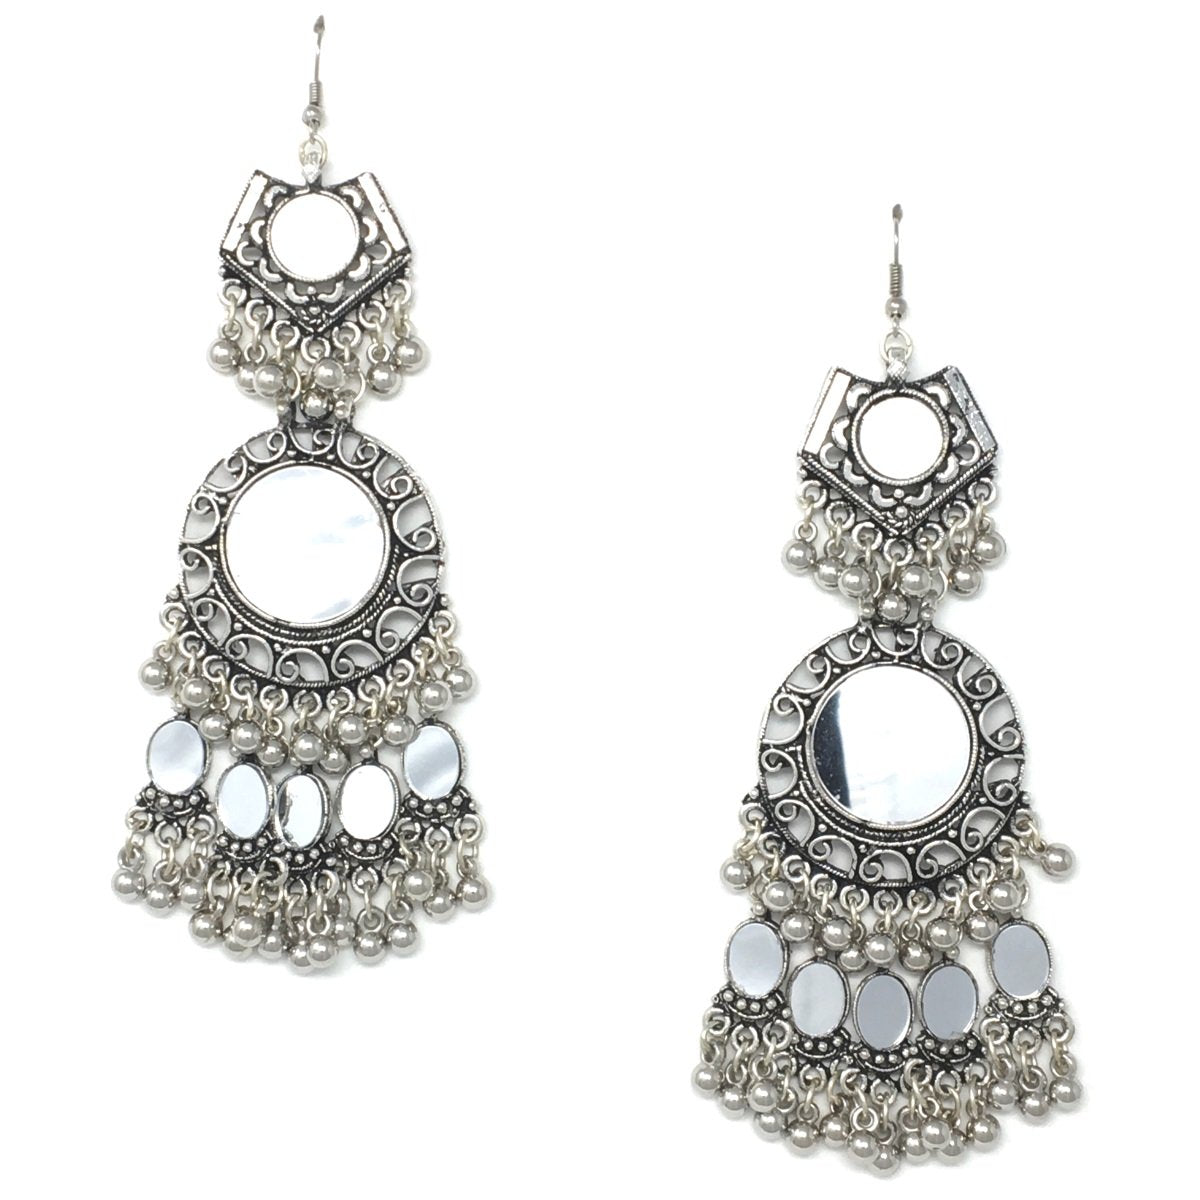 Antique Silver Dangle Drop Earrings with Mirror and Ghungroos